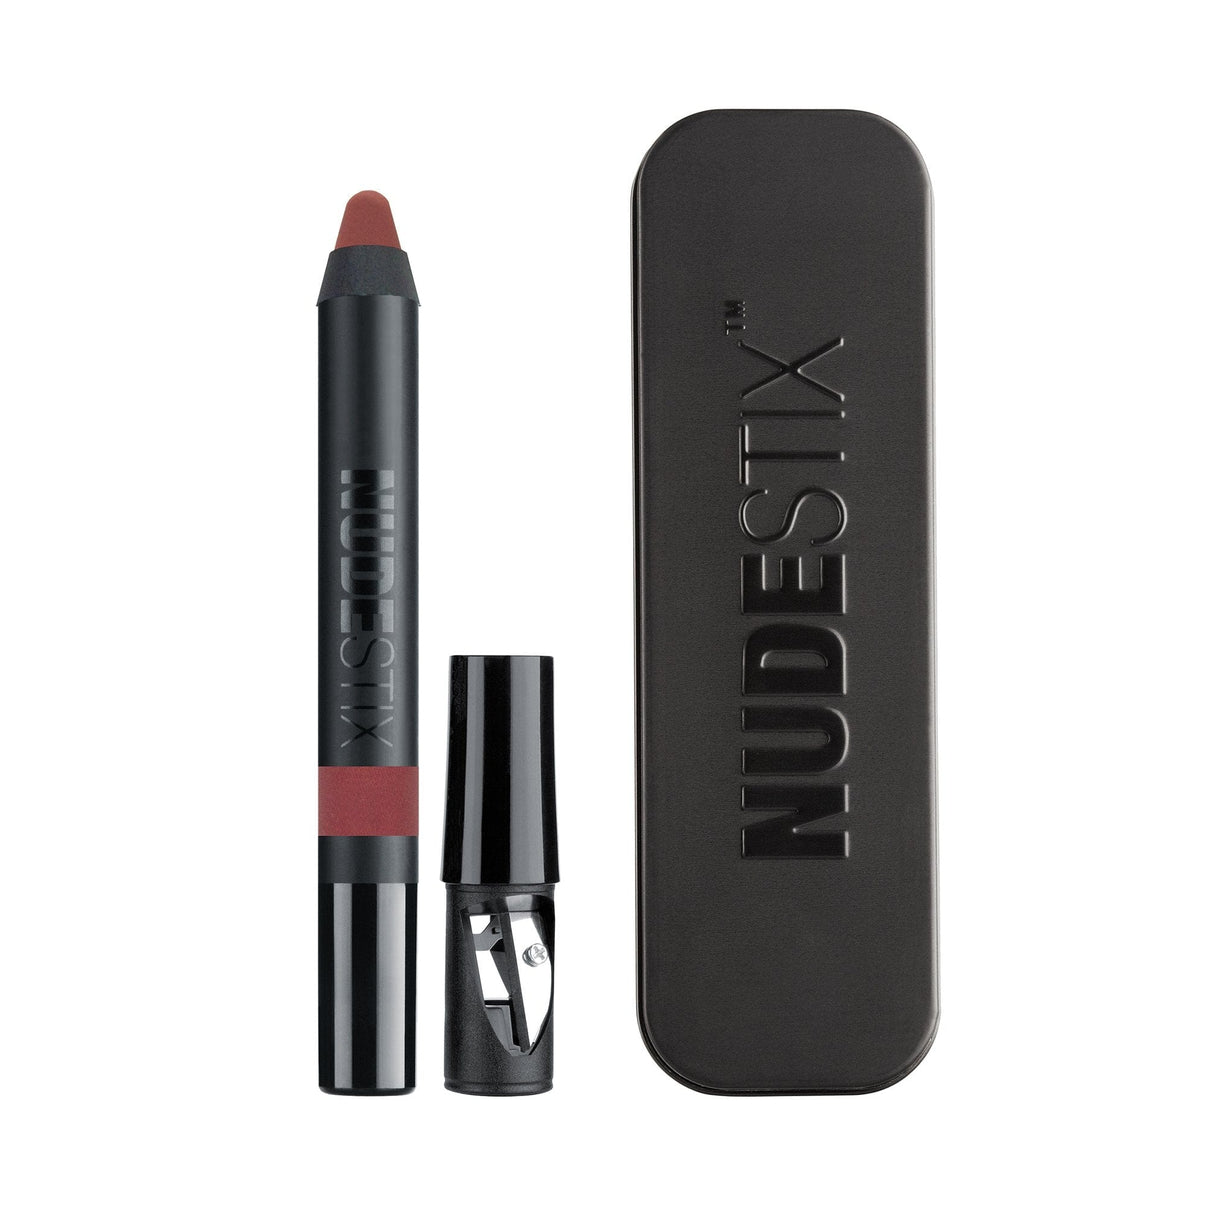 Intense Matte Lip + Cheek pencil in shade retro with sharpener and nudestix can